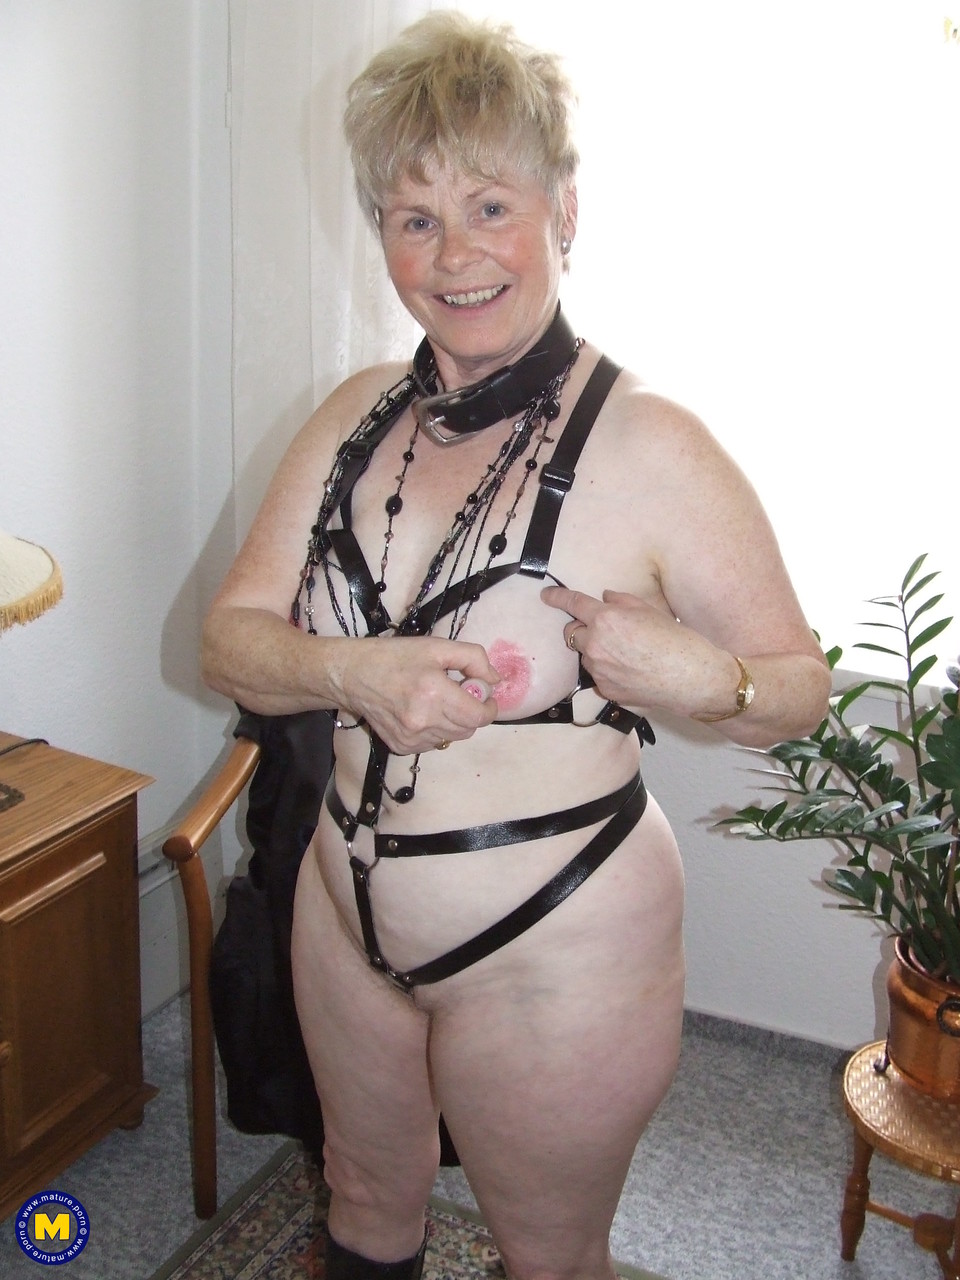 Older BBW with short spiky hair takes off lingerie and fetish gear to go nude foto porno #423878676 | Mature NL Pics, Petra, Granny, porno móvil